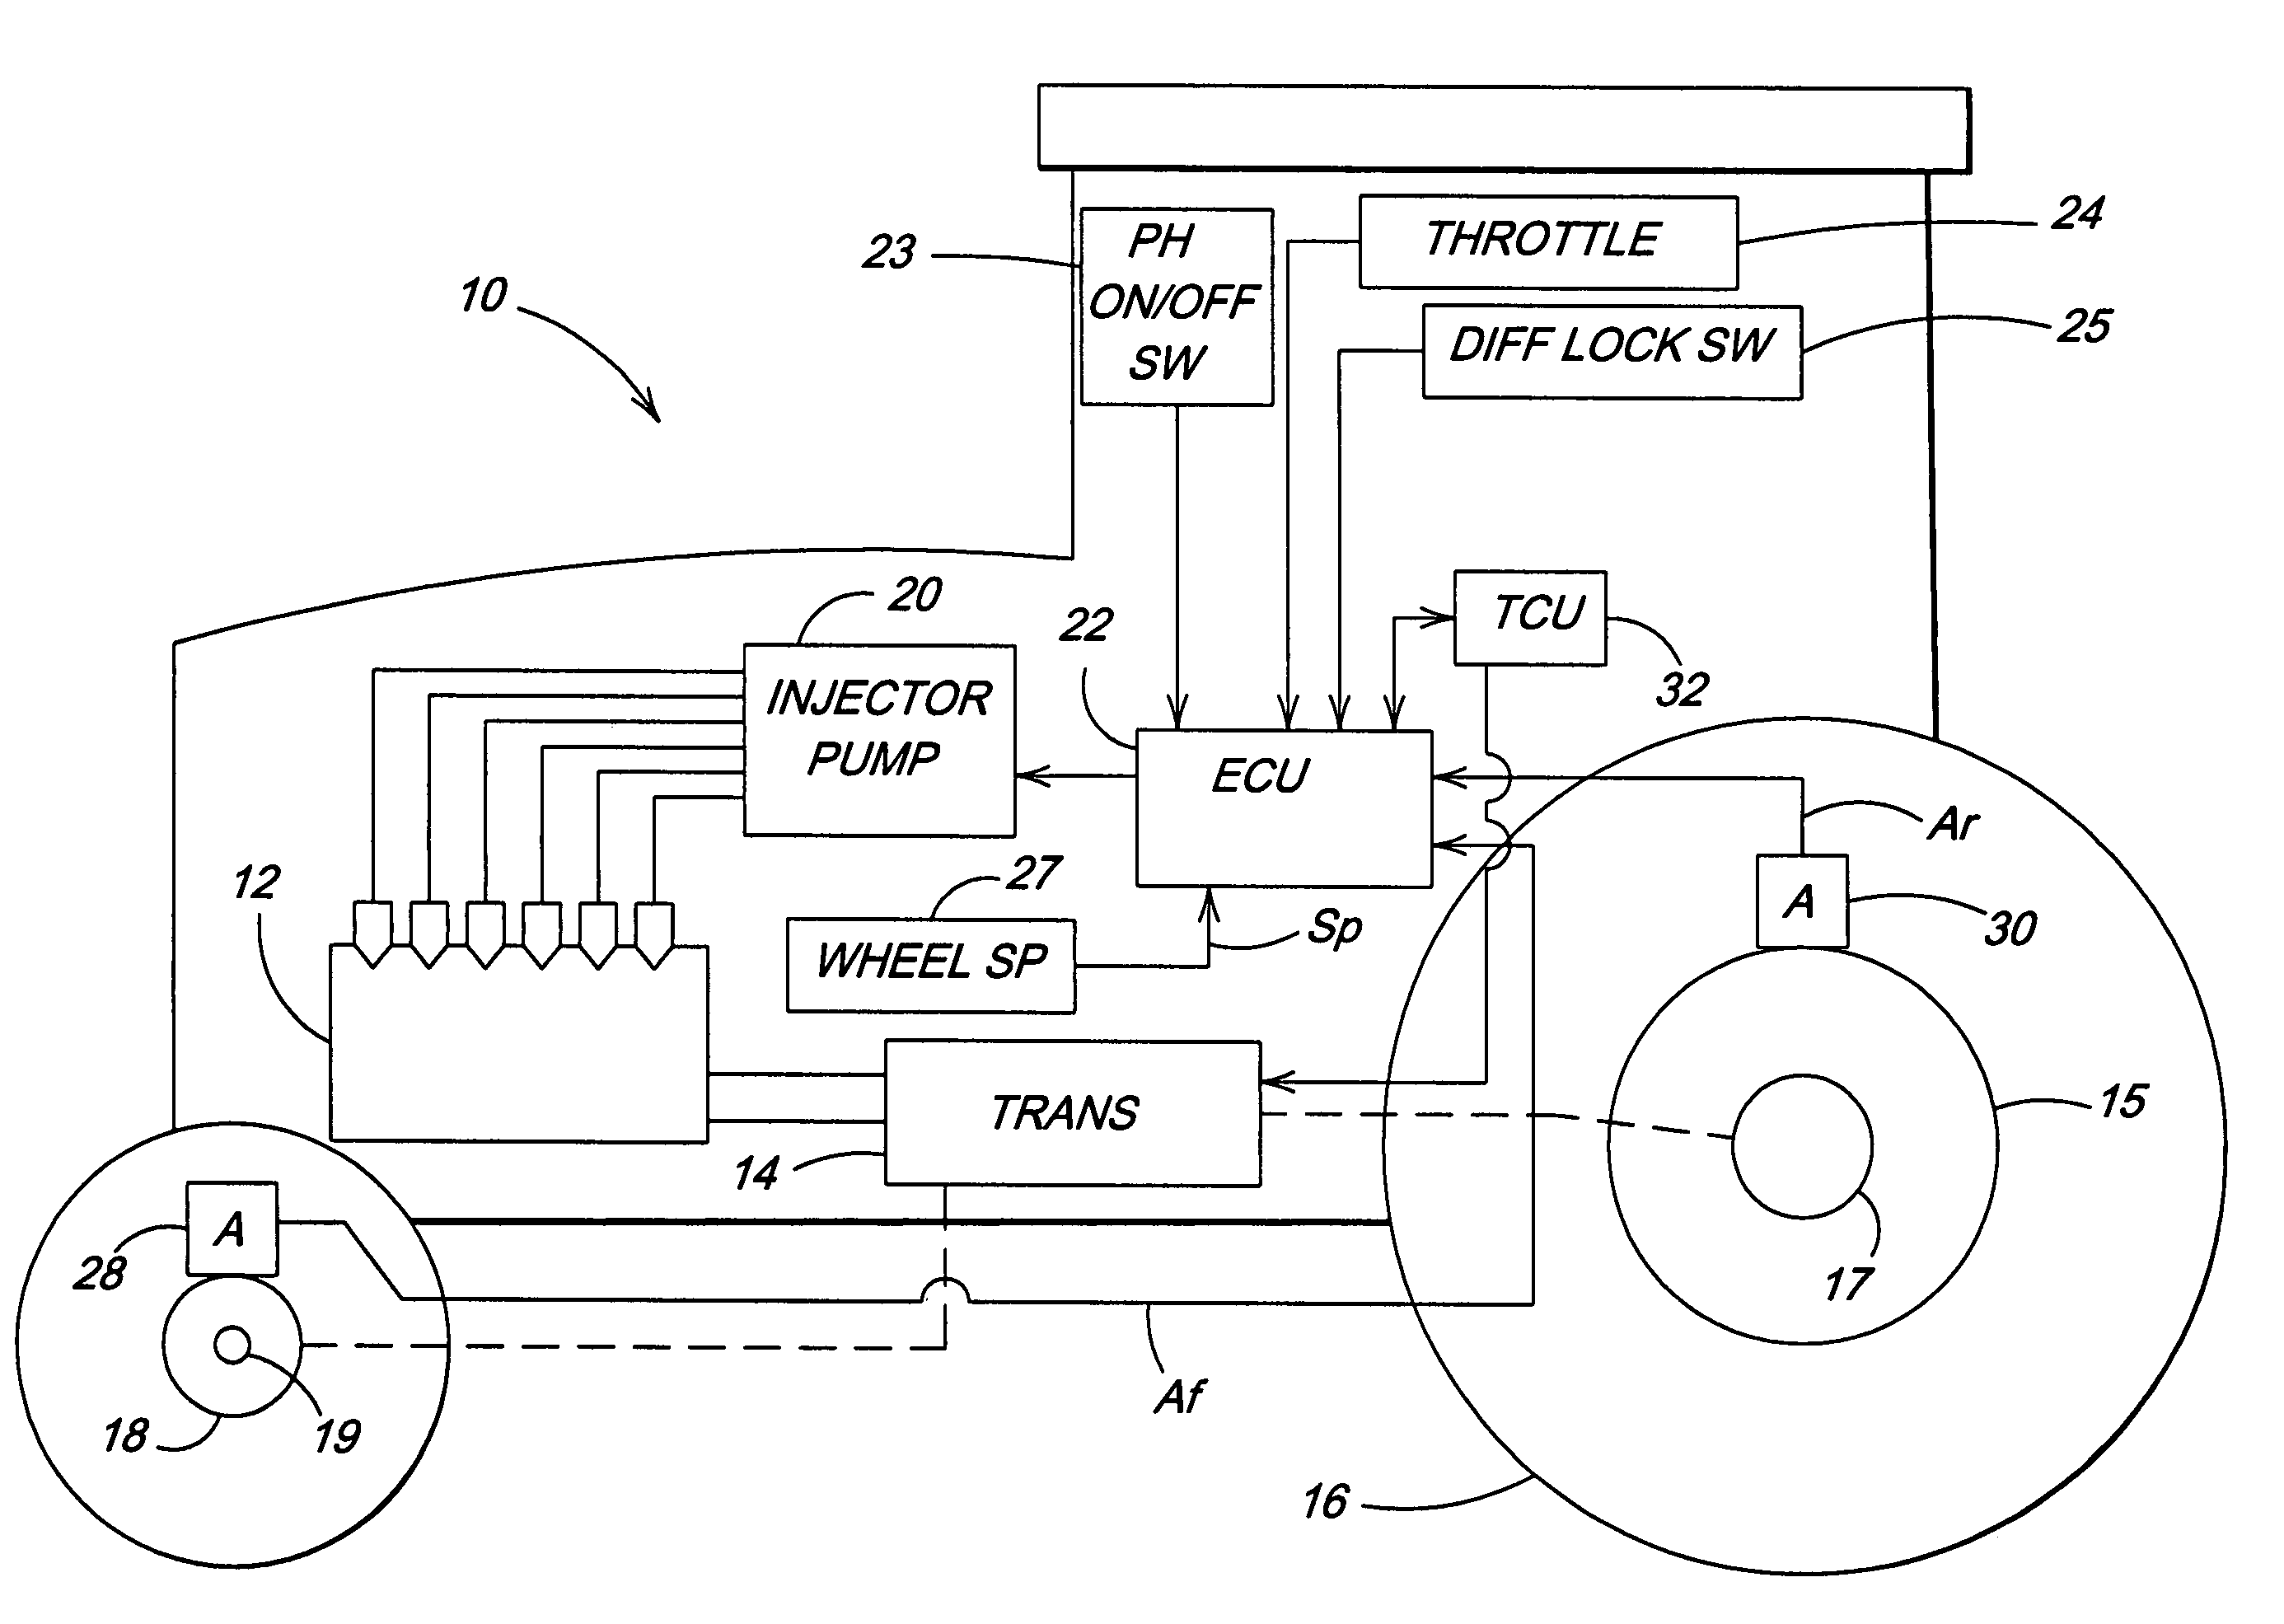 Tractor power hop control system and method